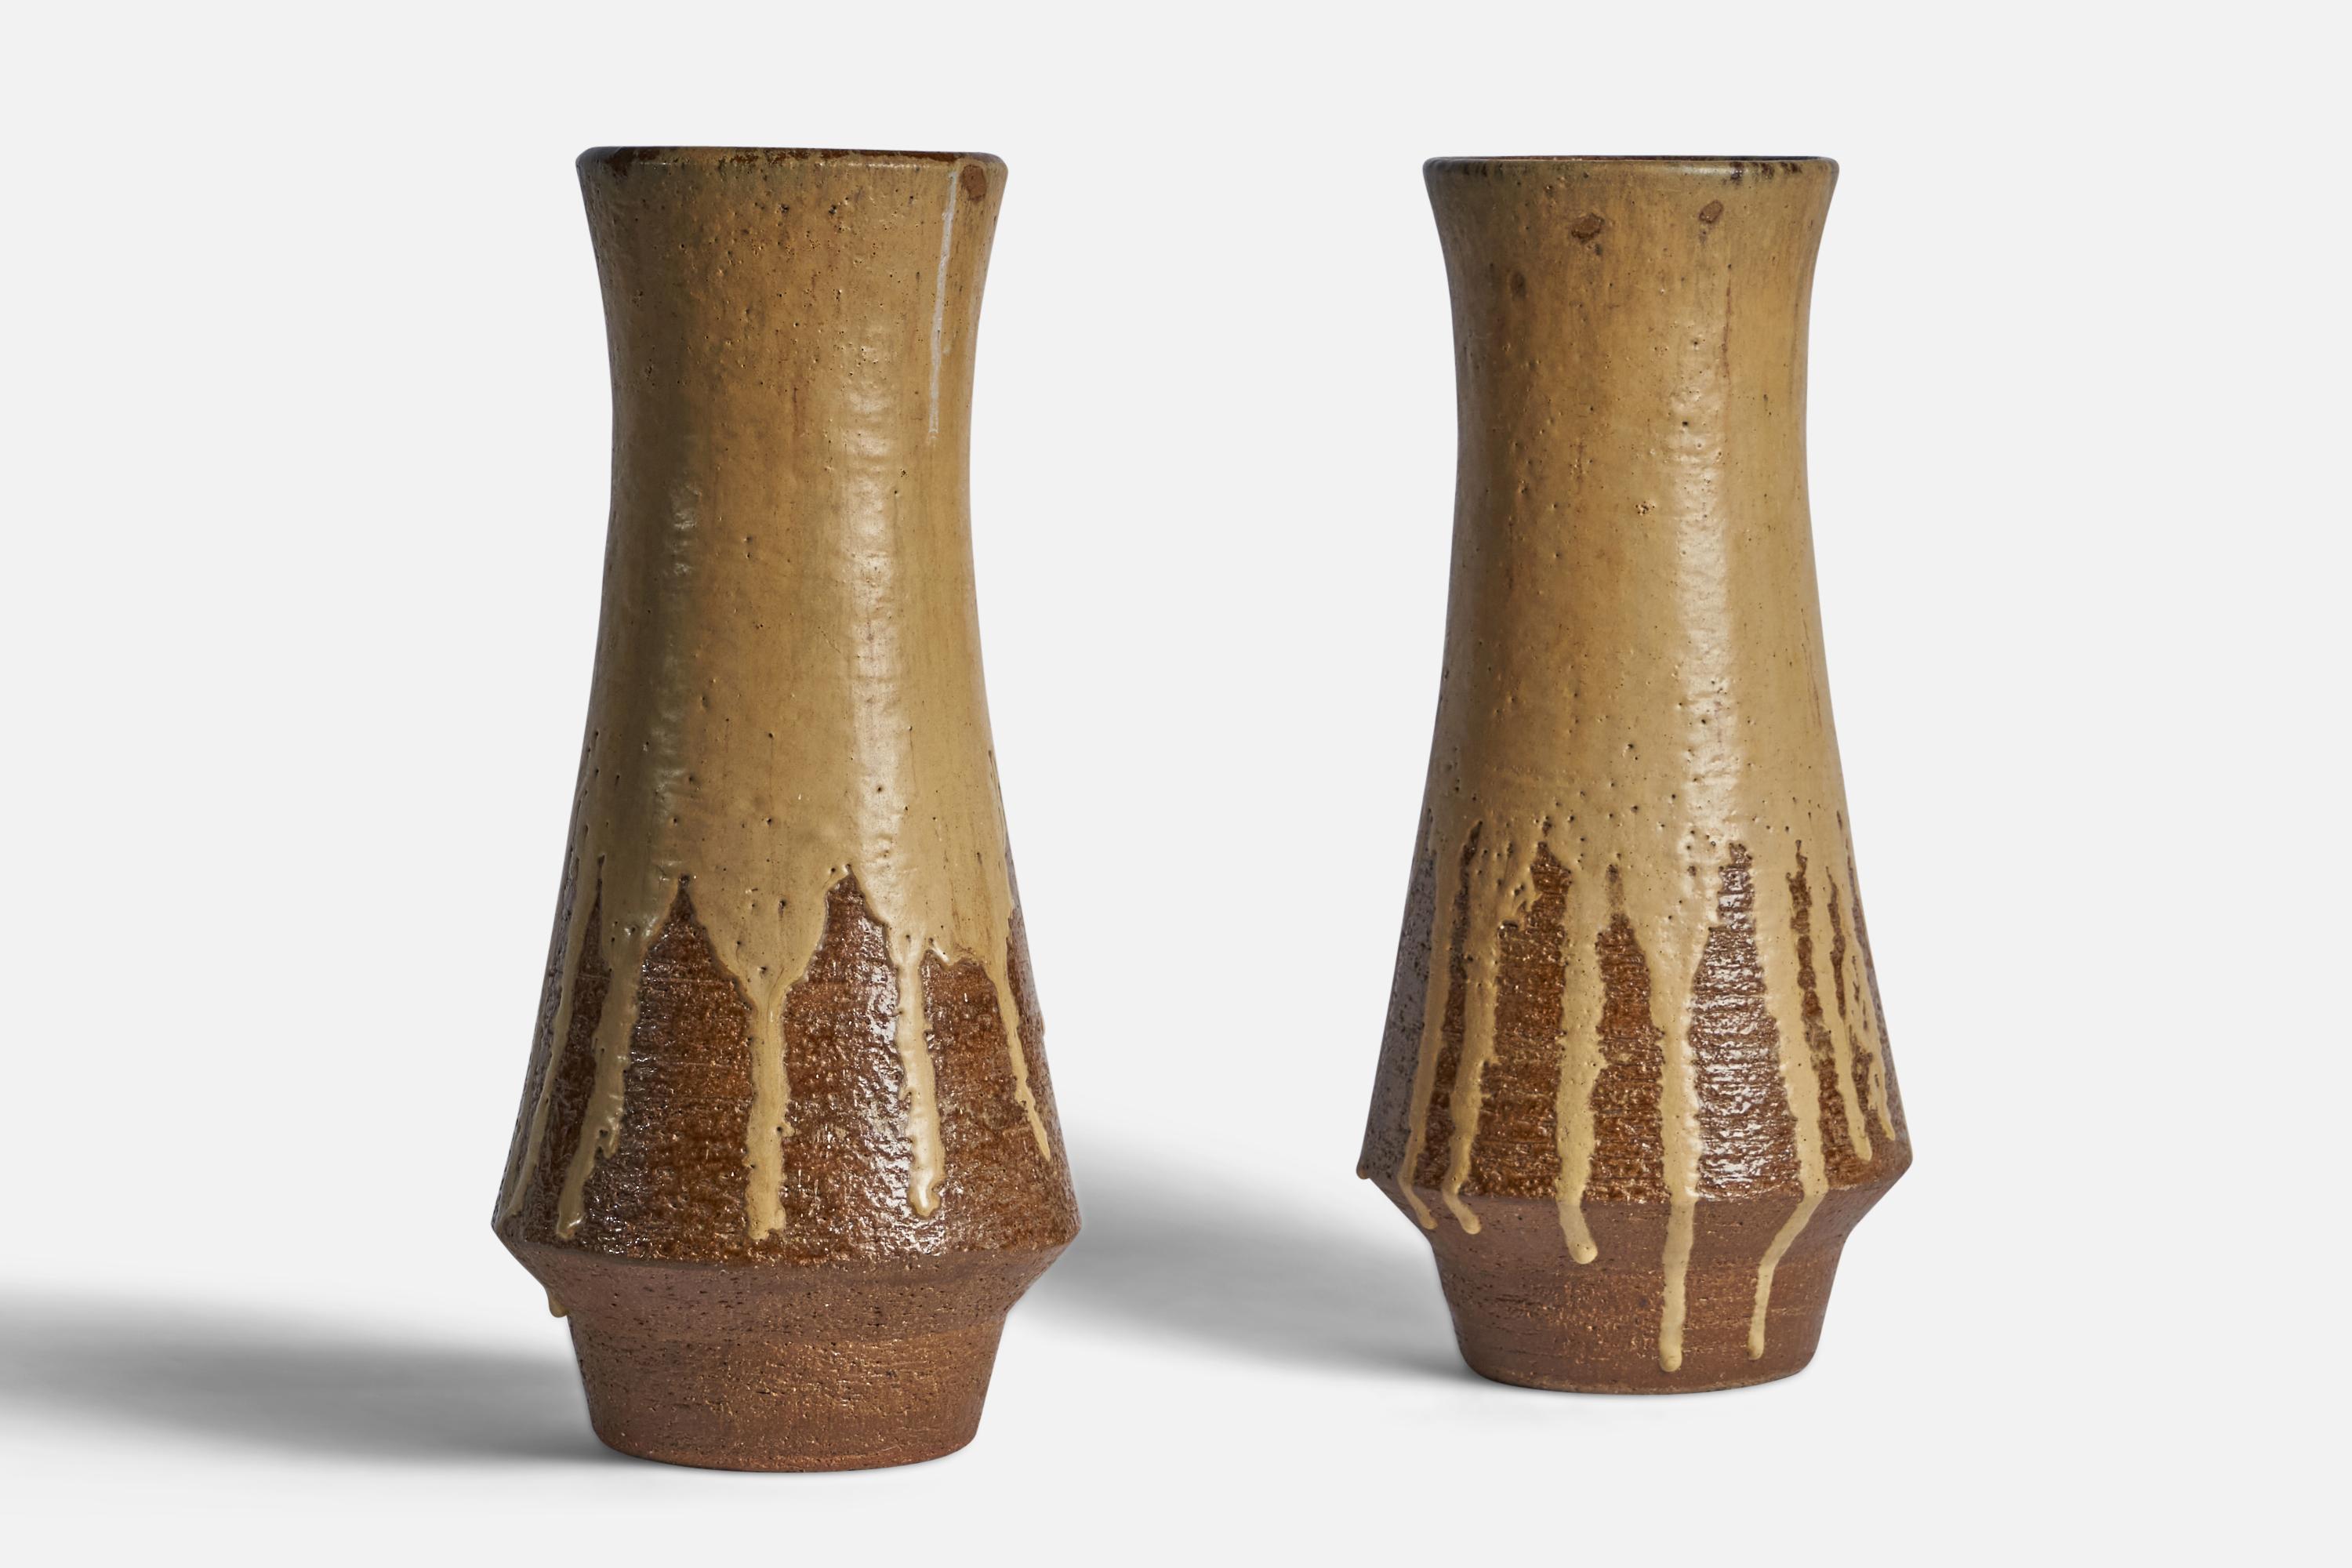 A pair of beige and brown-glazed stoneware vases designed and produced in Denmark, c. 1940s.